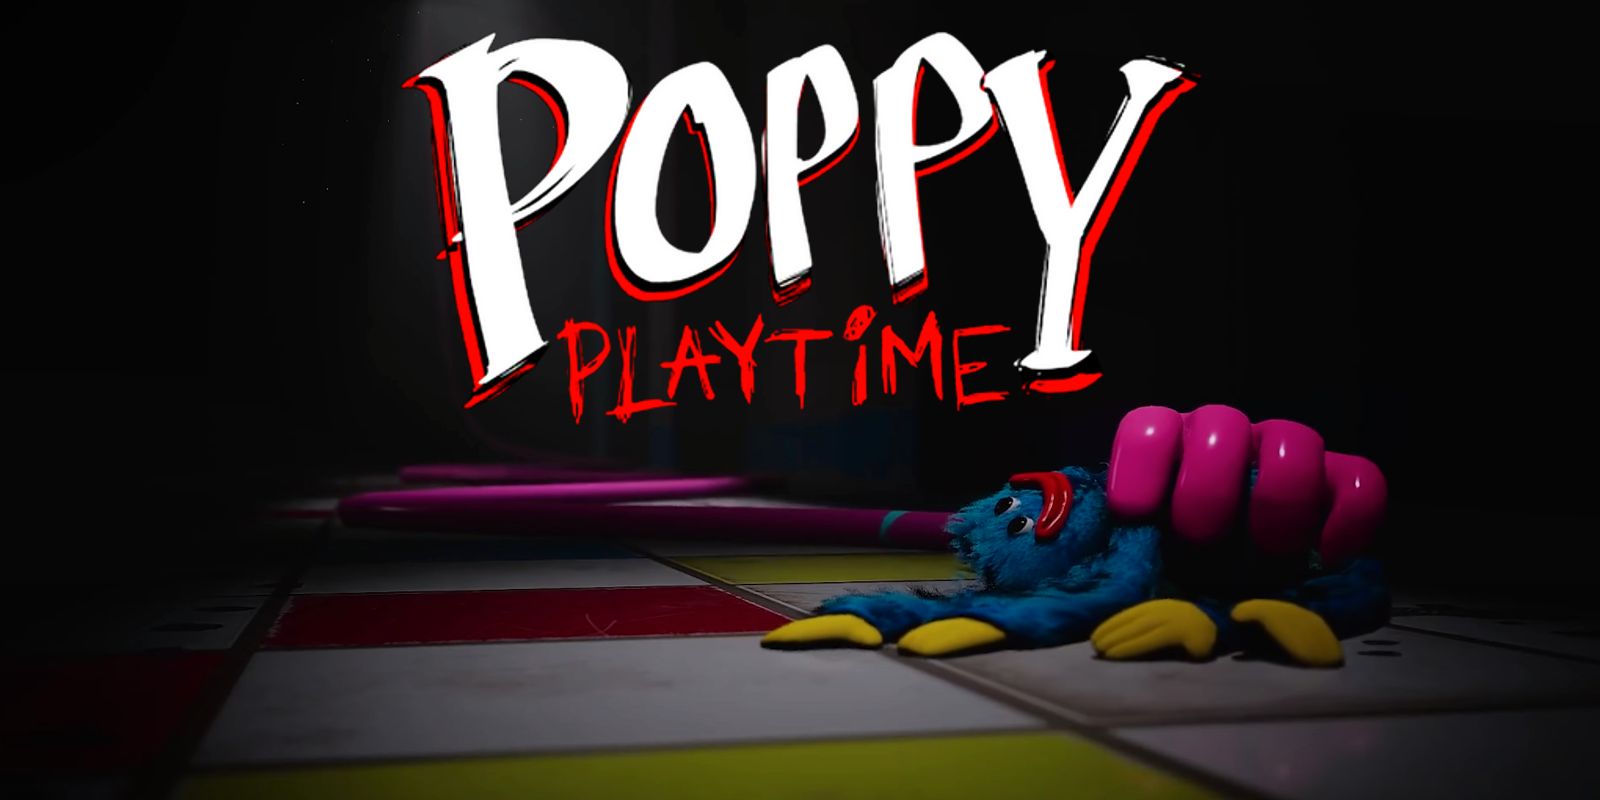 Poppy Playtime Lore To Know Before Chapter 2 Releases